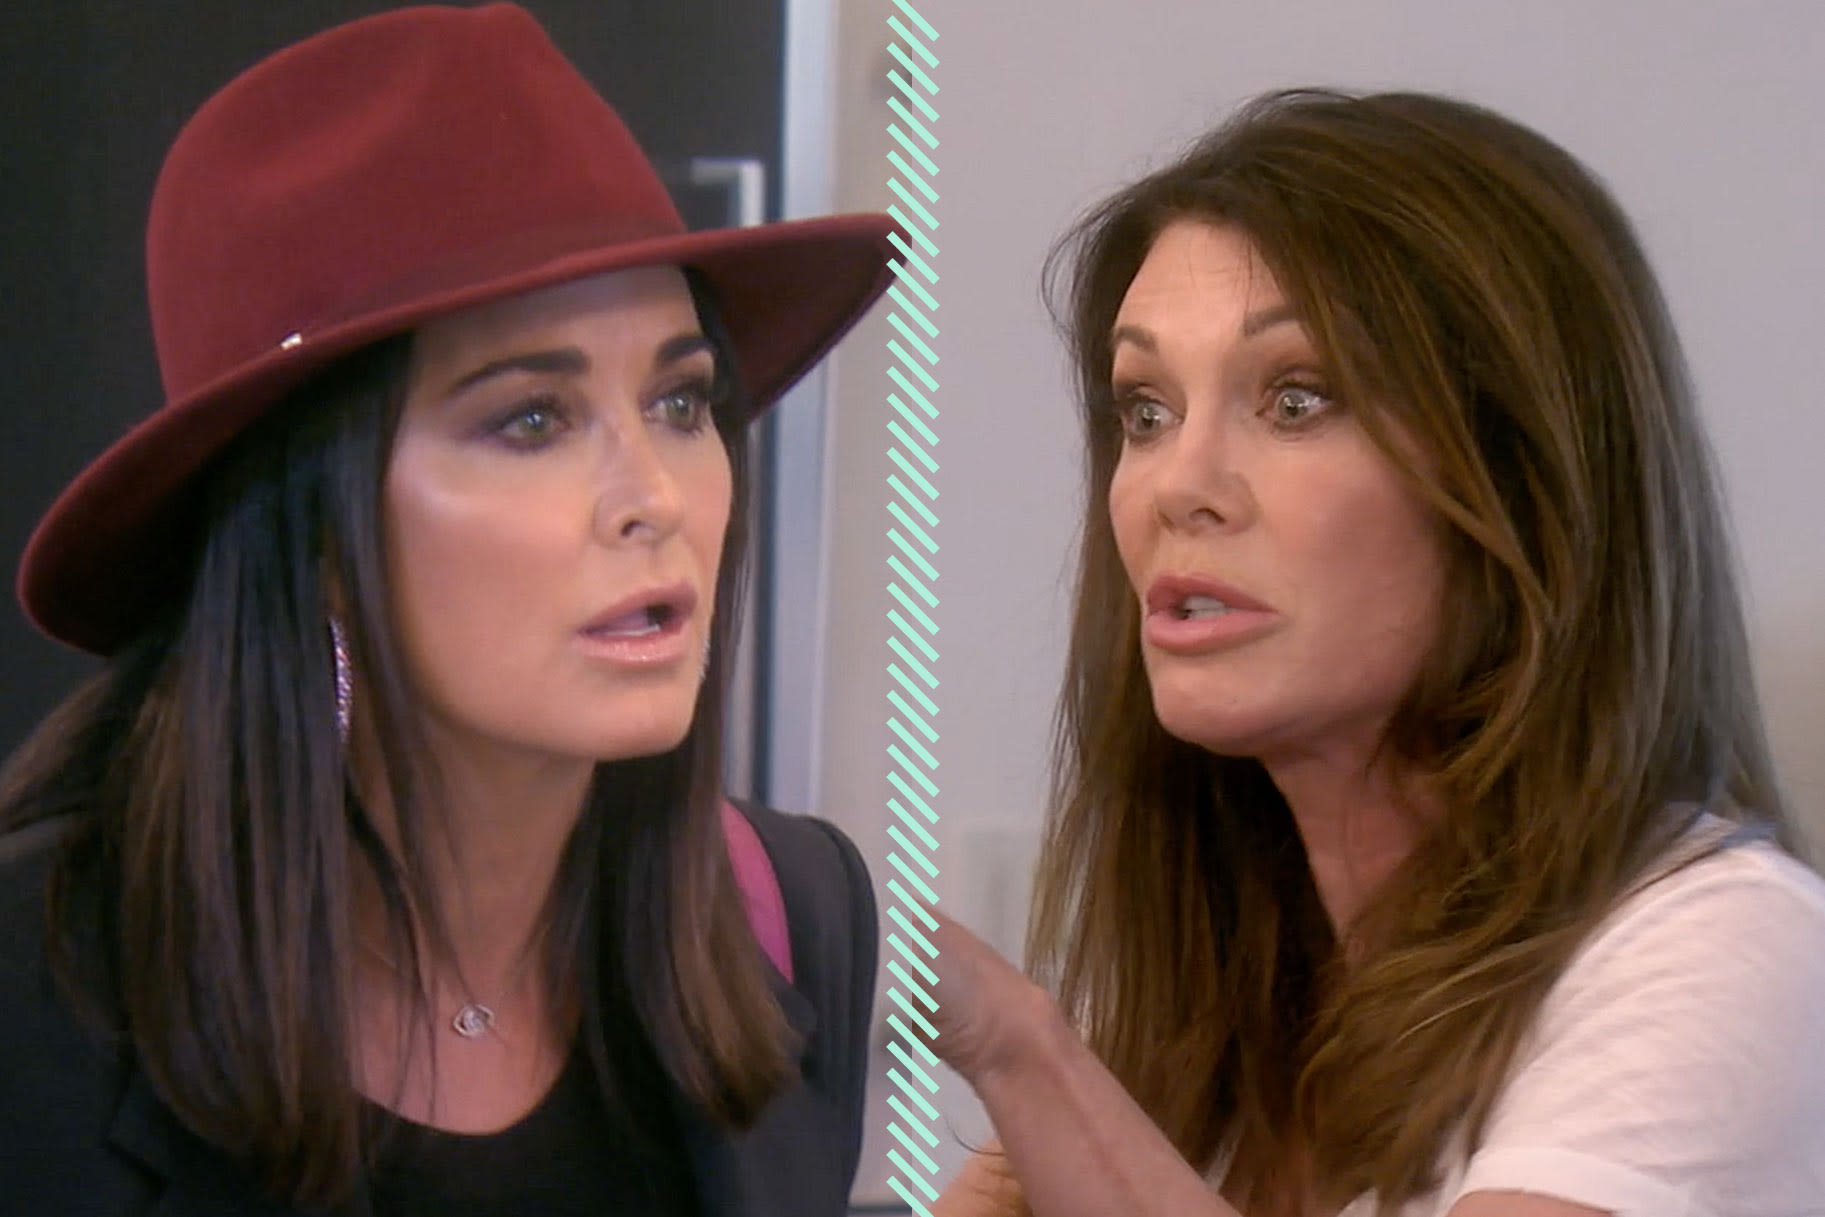 Does Lisa Vanderpump "Regret" the "Tossing" That Ended Her Kyle Richards Friendship Today? | Bravo TV Official Site